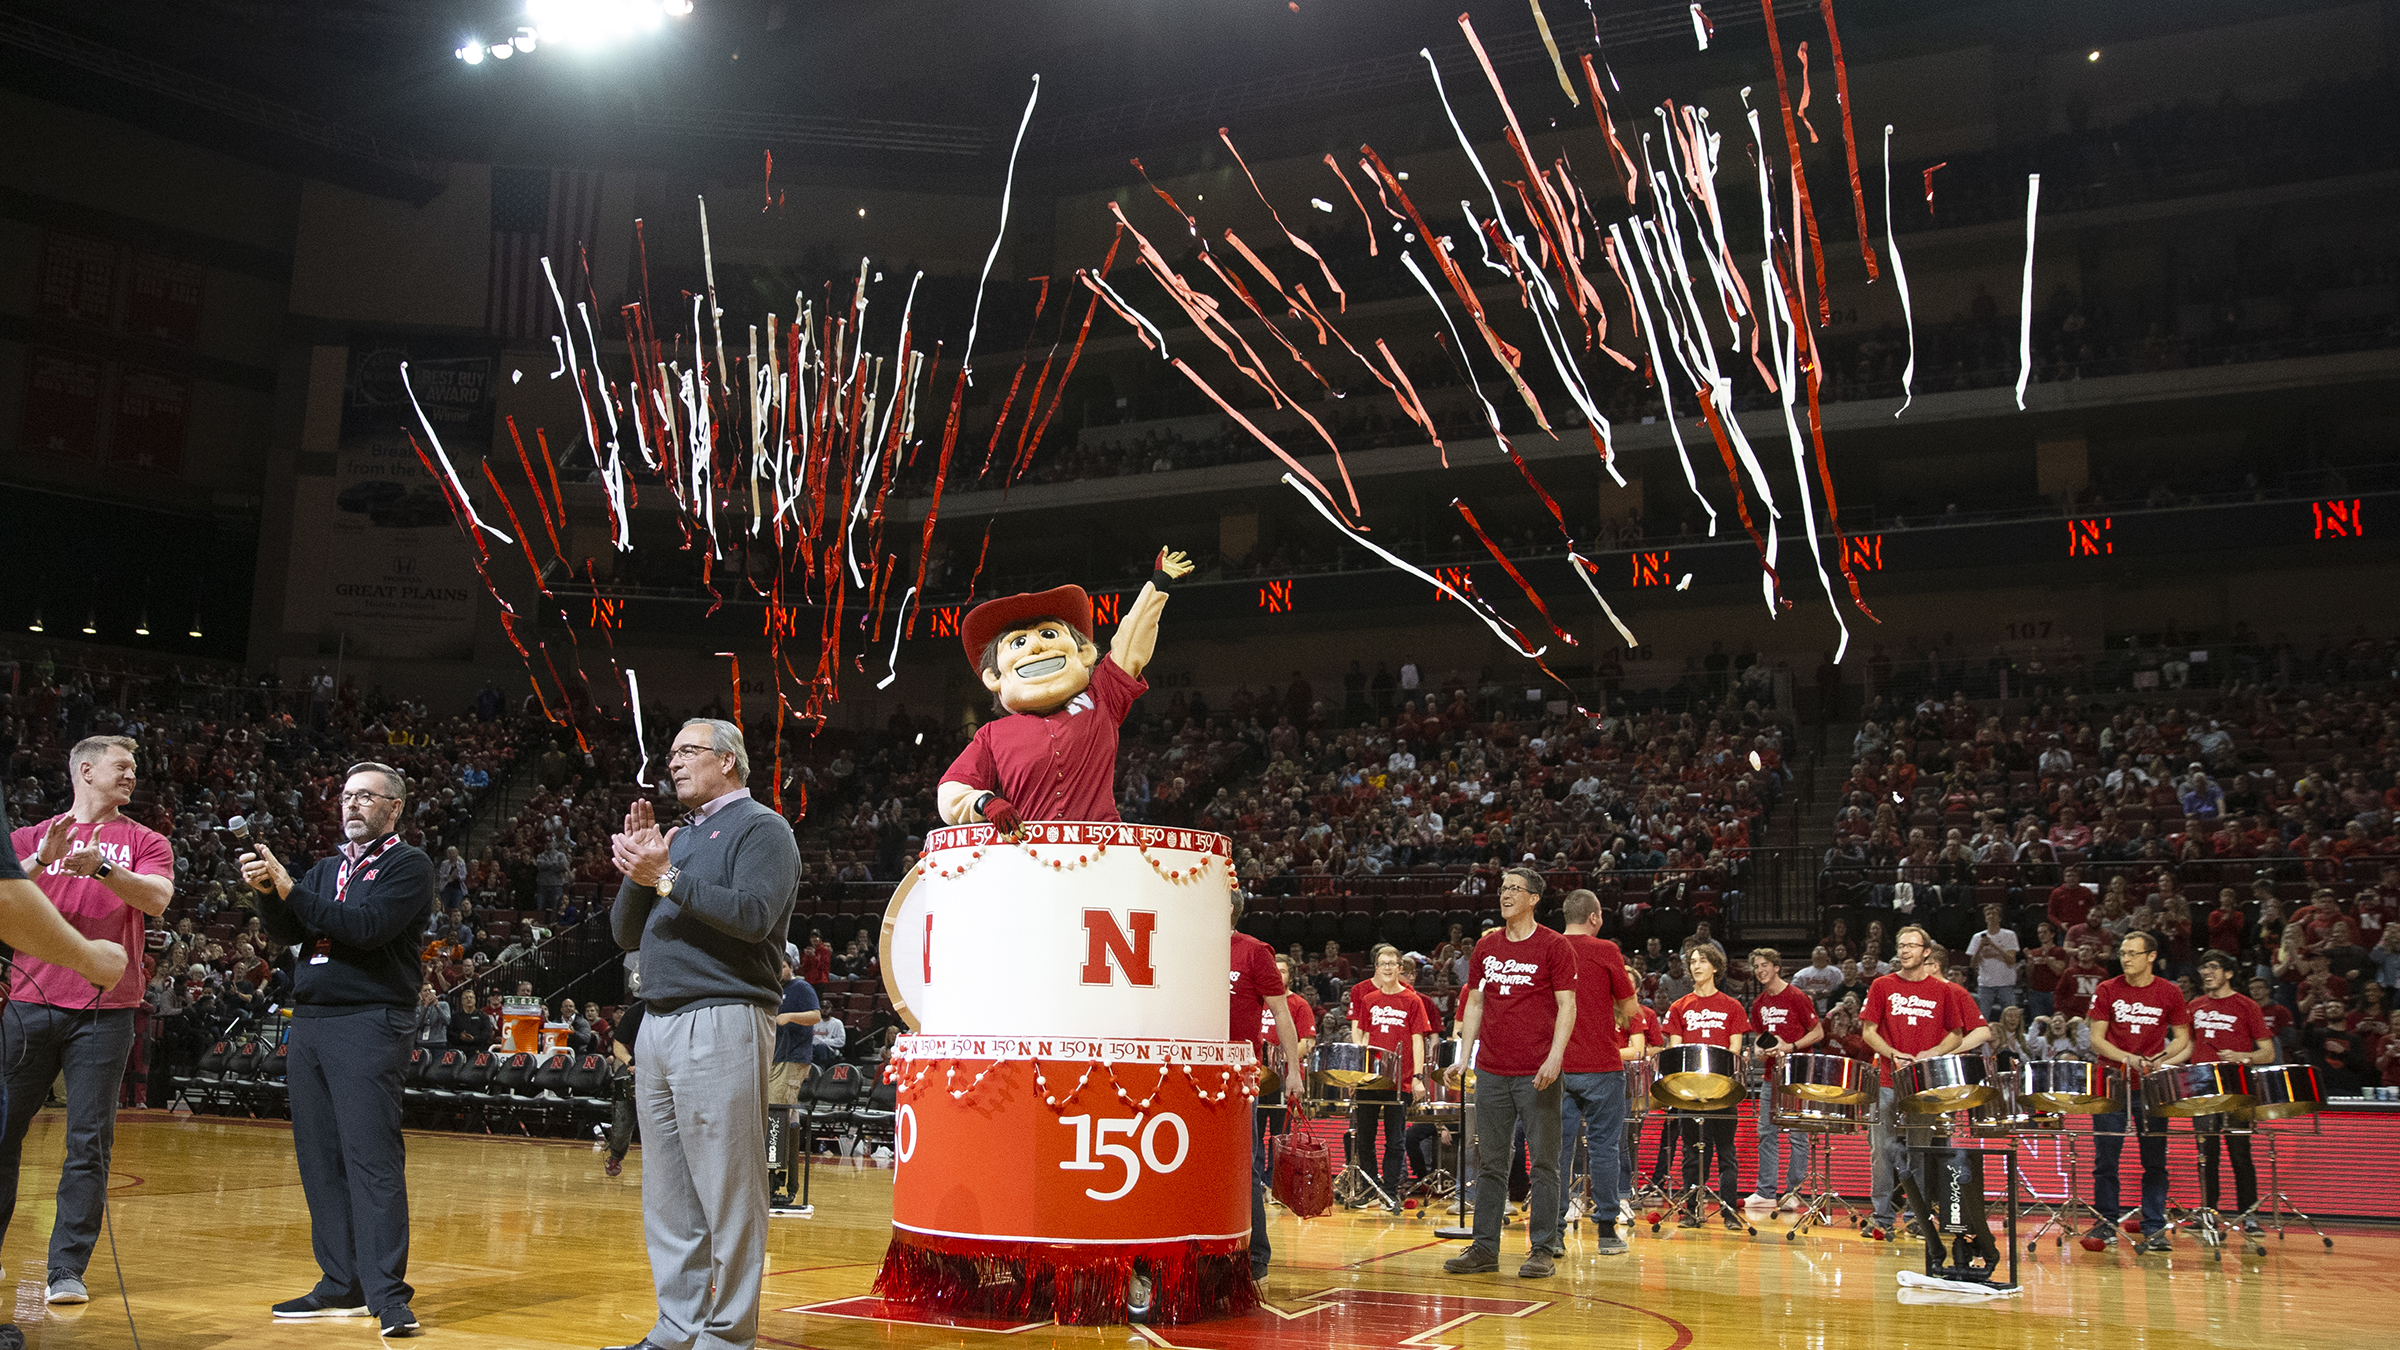 Huskers' halftime hoopla honors 150th year | Nebraska Today 